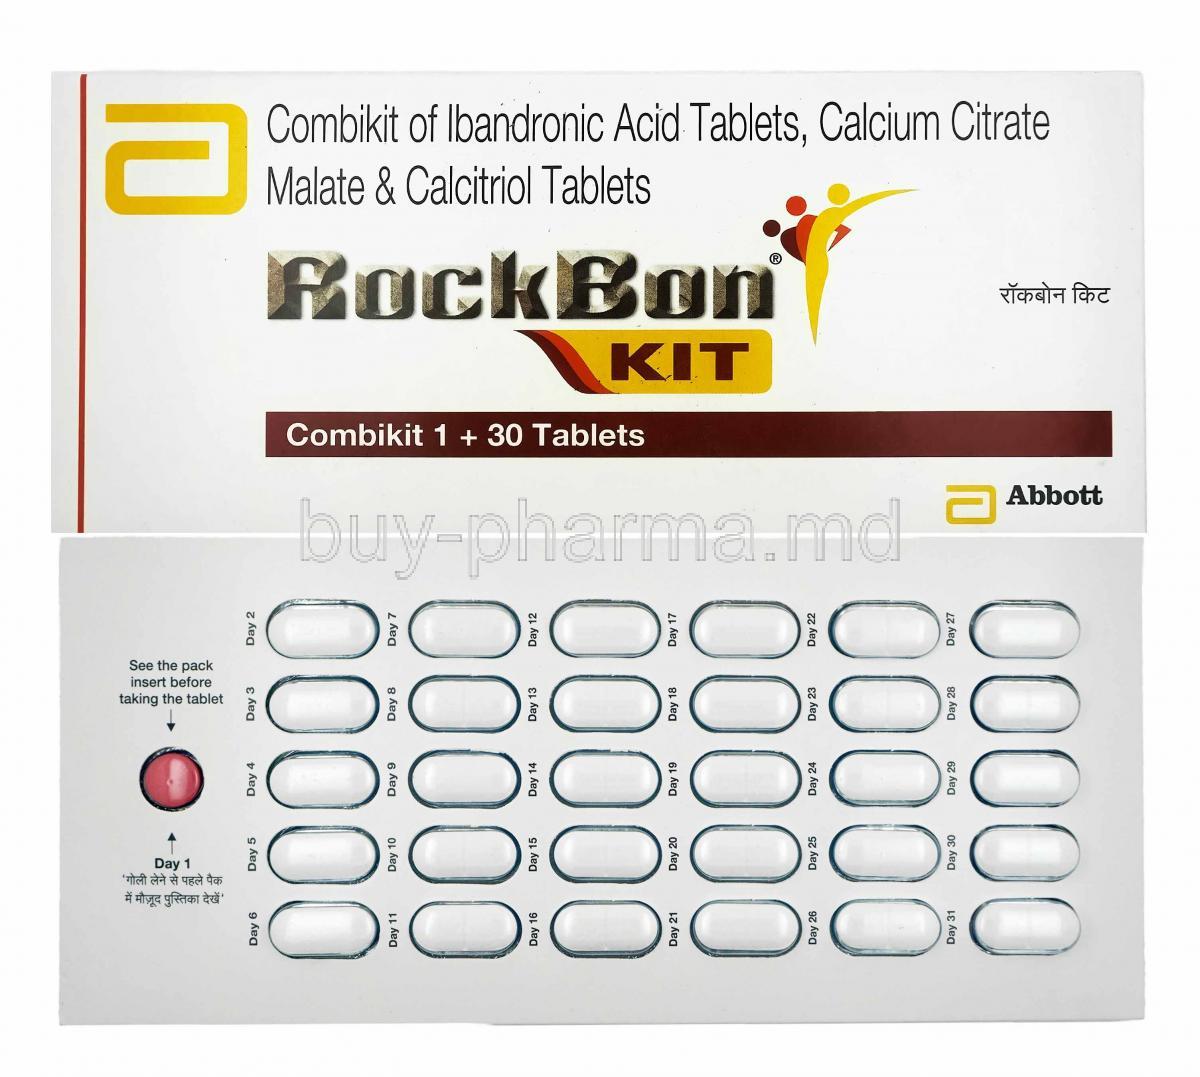 Rockbon Kit, Ibandronic Acid, Calcium and Vitamin D3 box and tablets